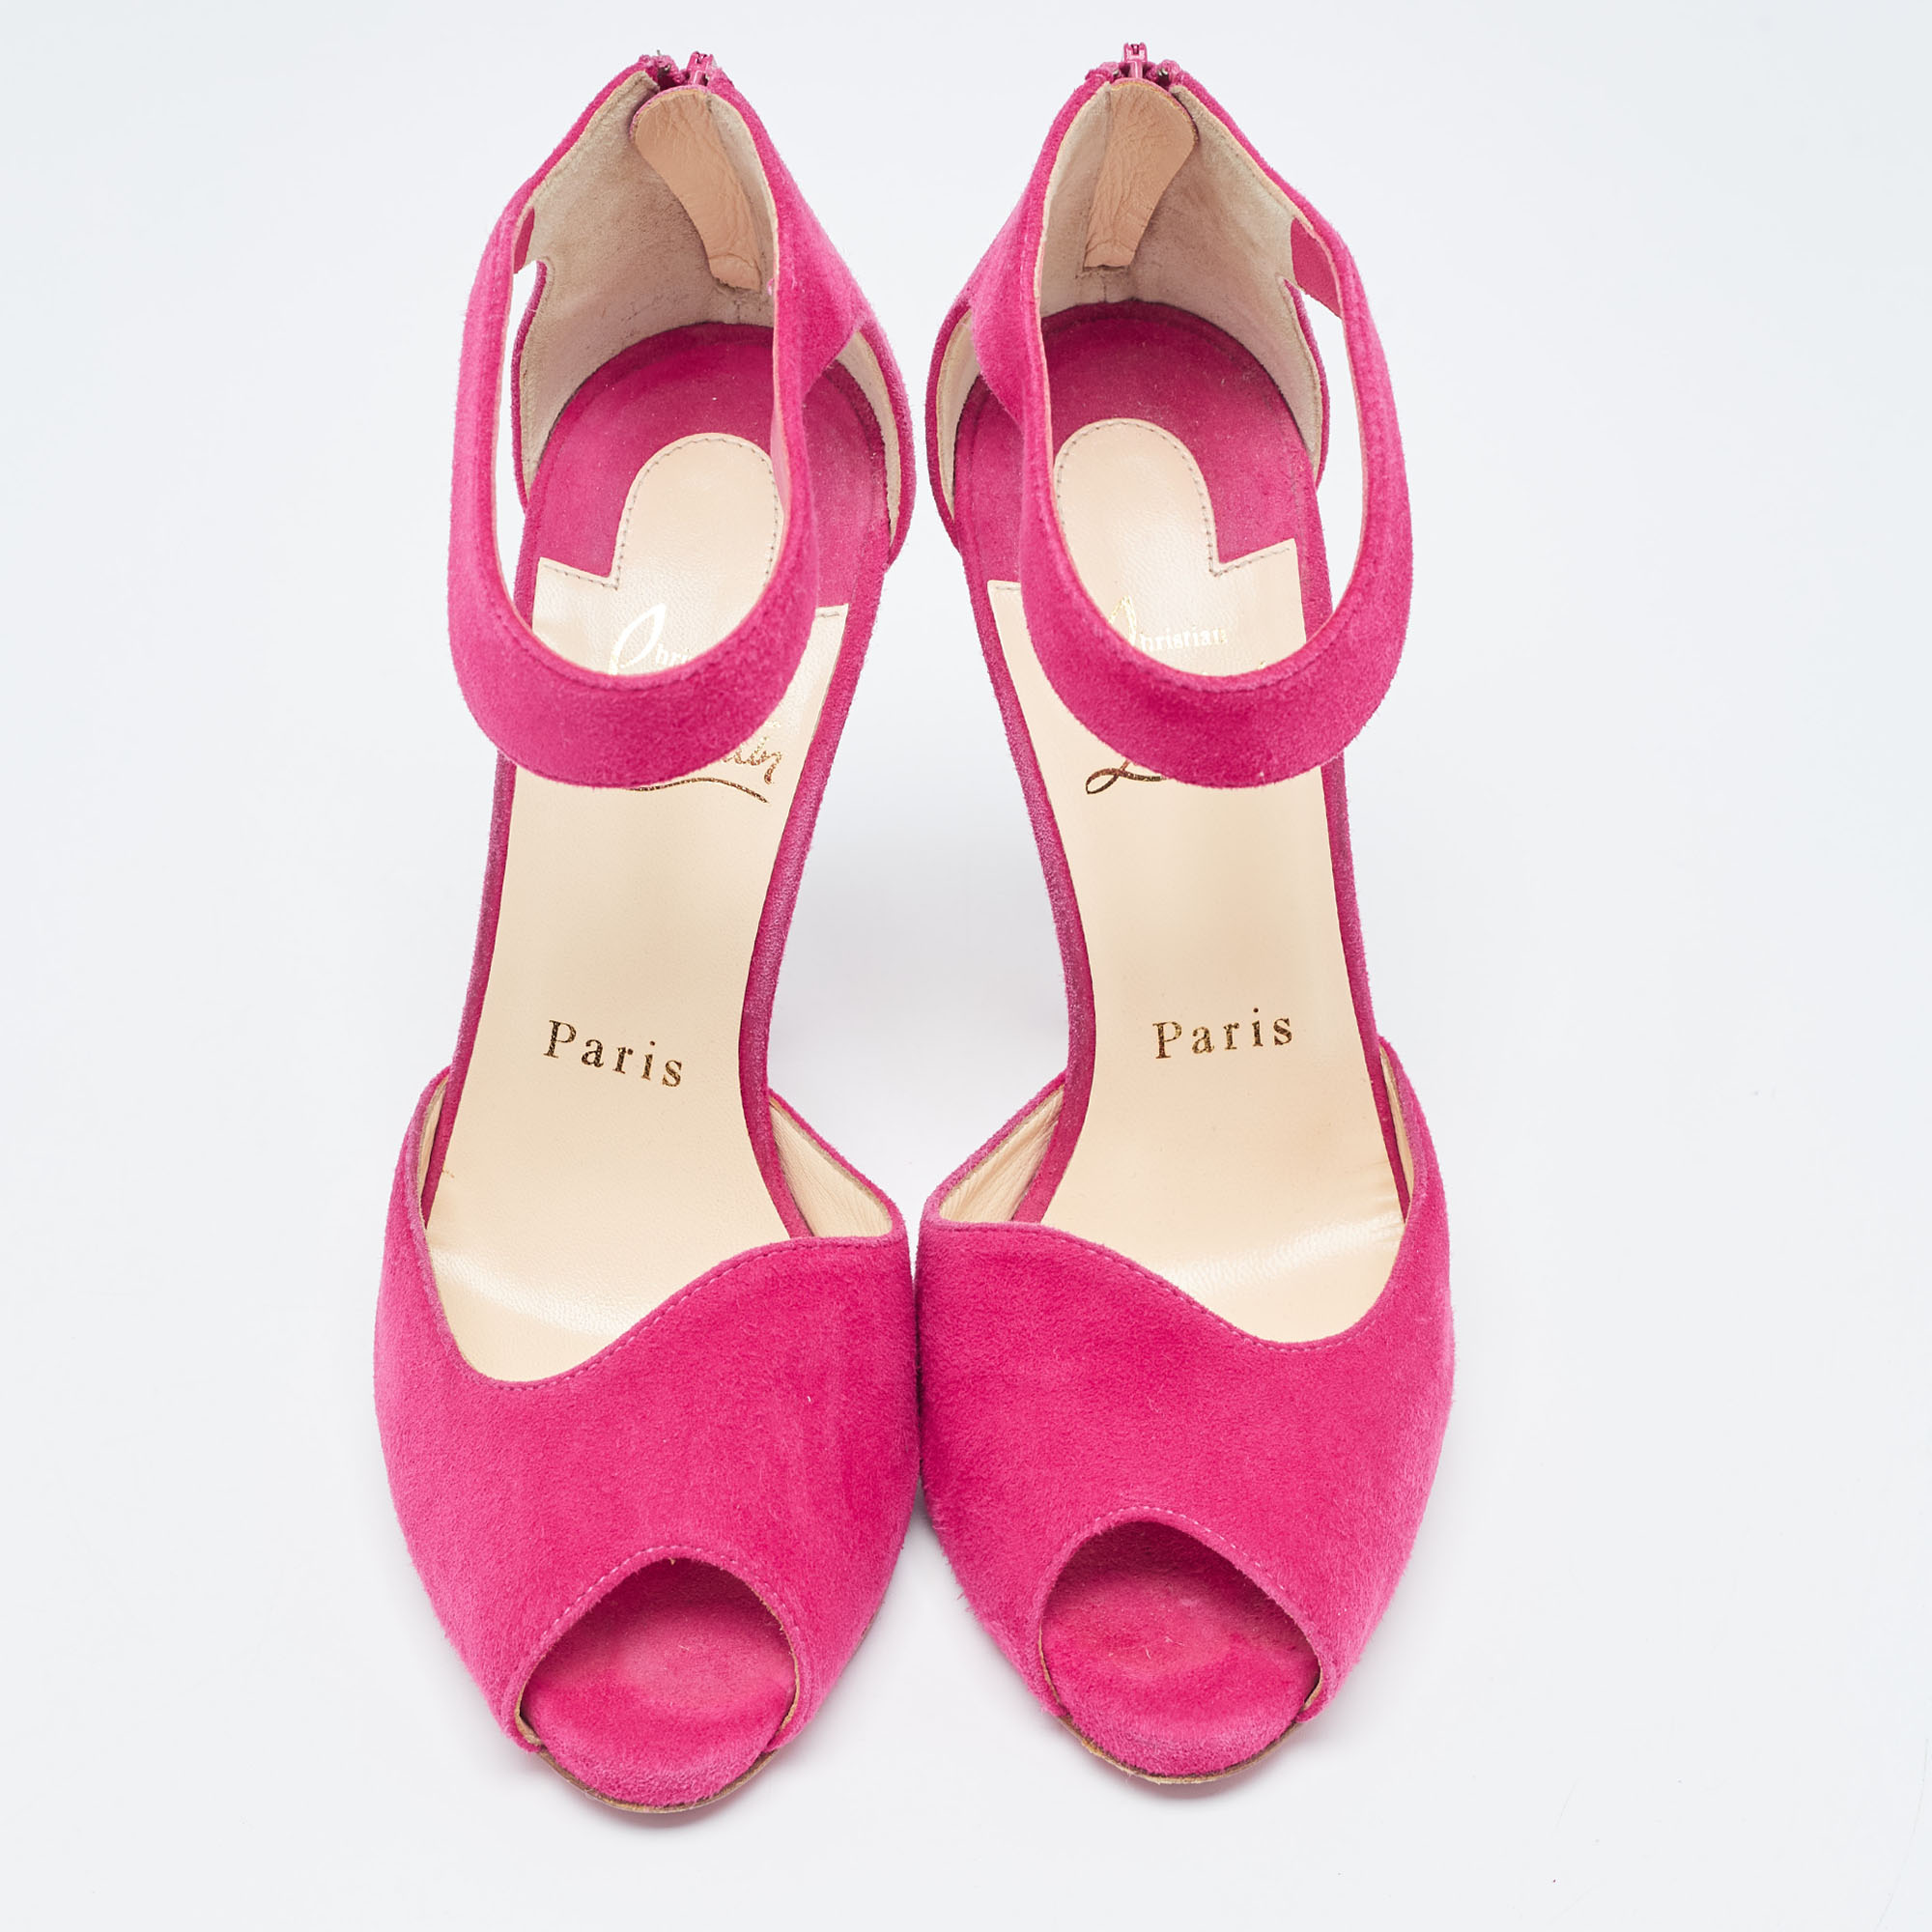 Christian Louboutin Pink Suede Ankle Strap Sandals Size 36